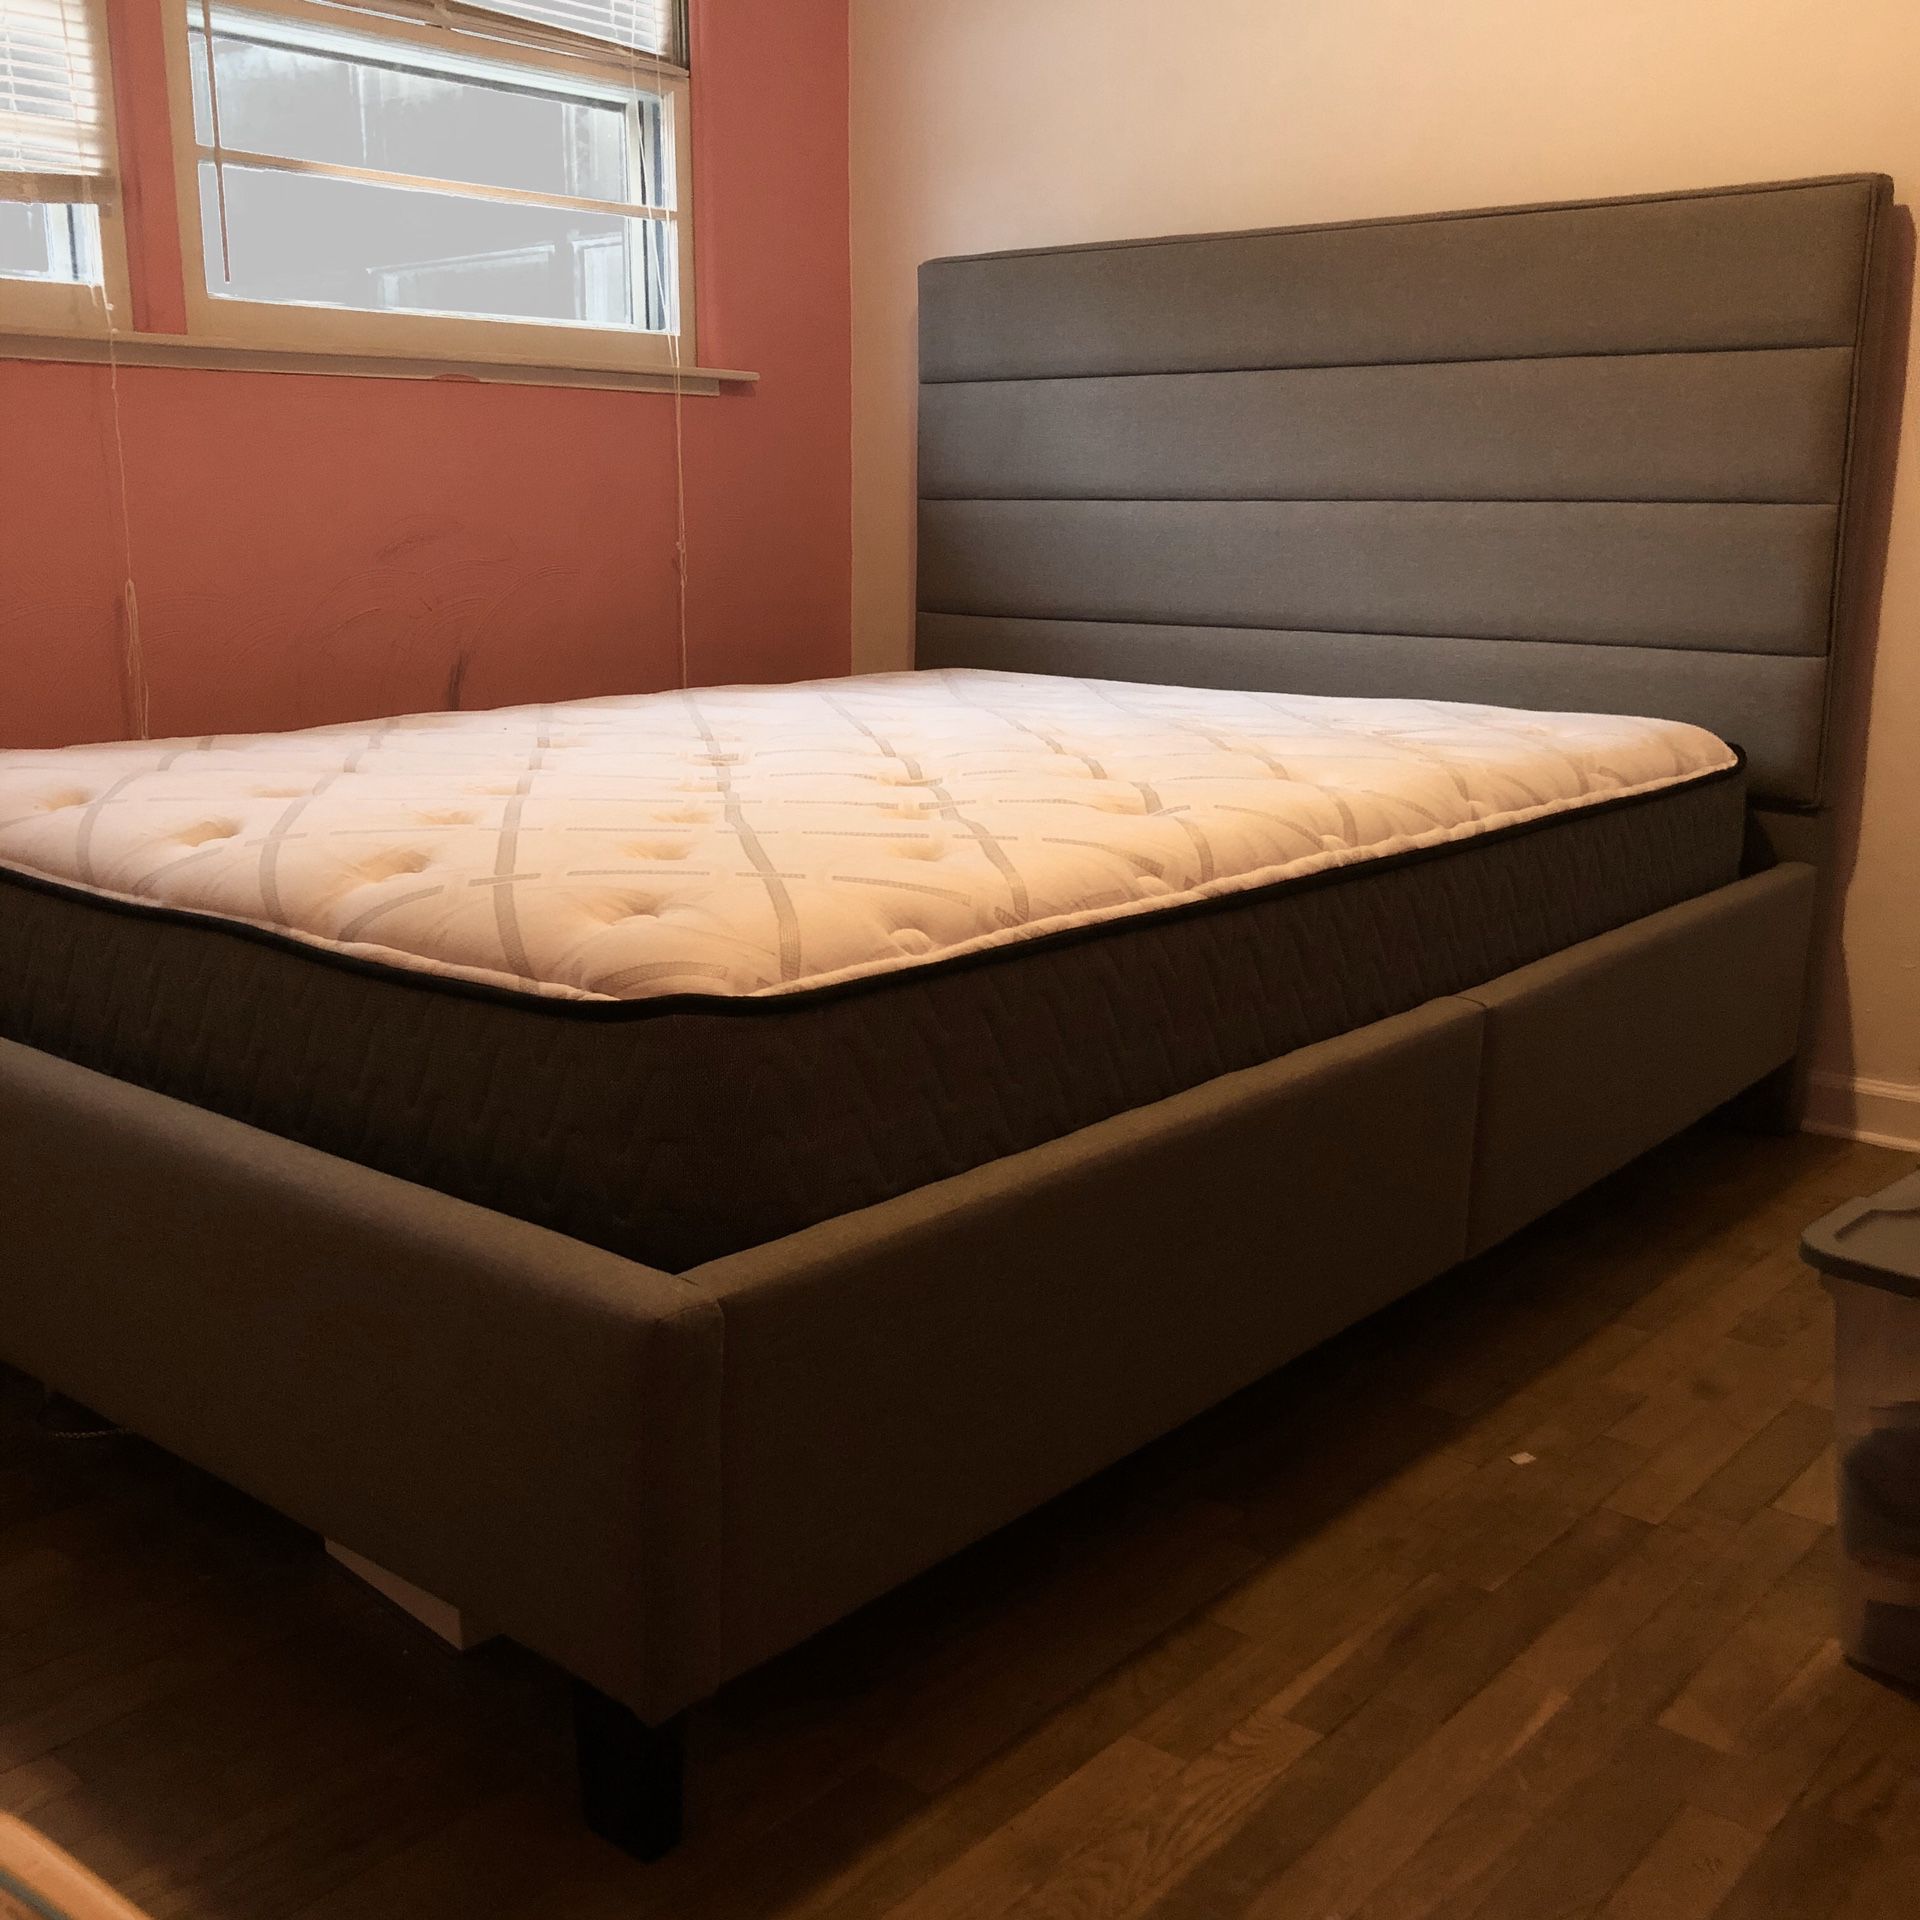 Queen mattress, boxspring and bed frame.